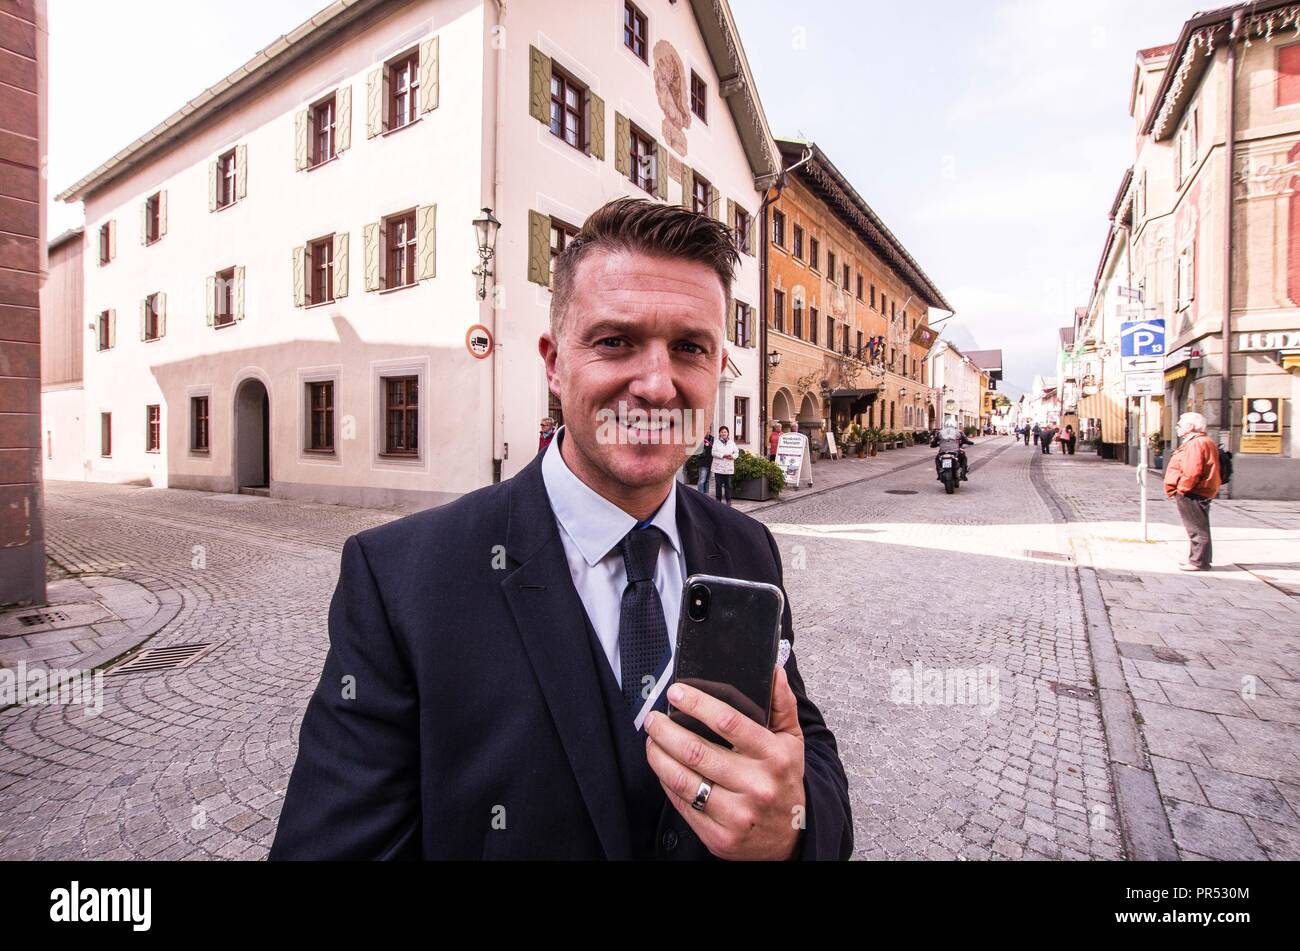 Garmisch Partenkirchen, Bavaria, Germany. 29th Sep, 2018. Right-extremist and founder of the EDL TOMMY ROBINSON in Garmisch Partenkirchen, southern Bavaria. Adding themselves to the "who's who"" list of of several hundred right-extremists from Germany, Austria, Switzerland, and other countries, Tommy Robinson, founder of the British EDL, Lutz Bachmann, grounder of Germany's Pegida, and Martin Sellner of the Identitaere Bewegung were guests as the Compact Konferenz held in the international tourist town of Garmisch Partenkirchen in southern Bavaria. The conferences are held by Jue Stock Photo